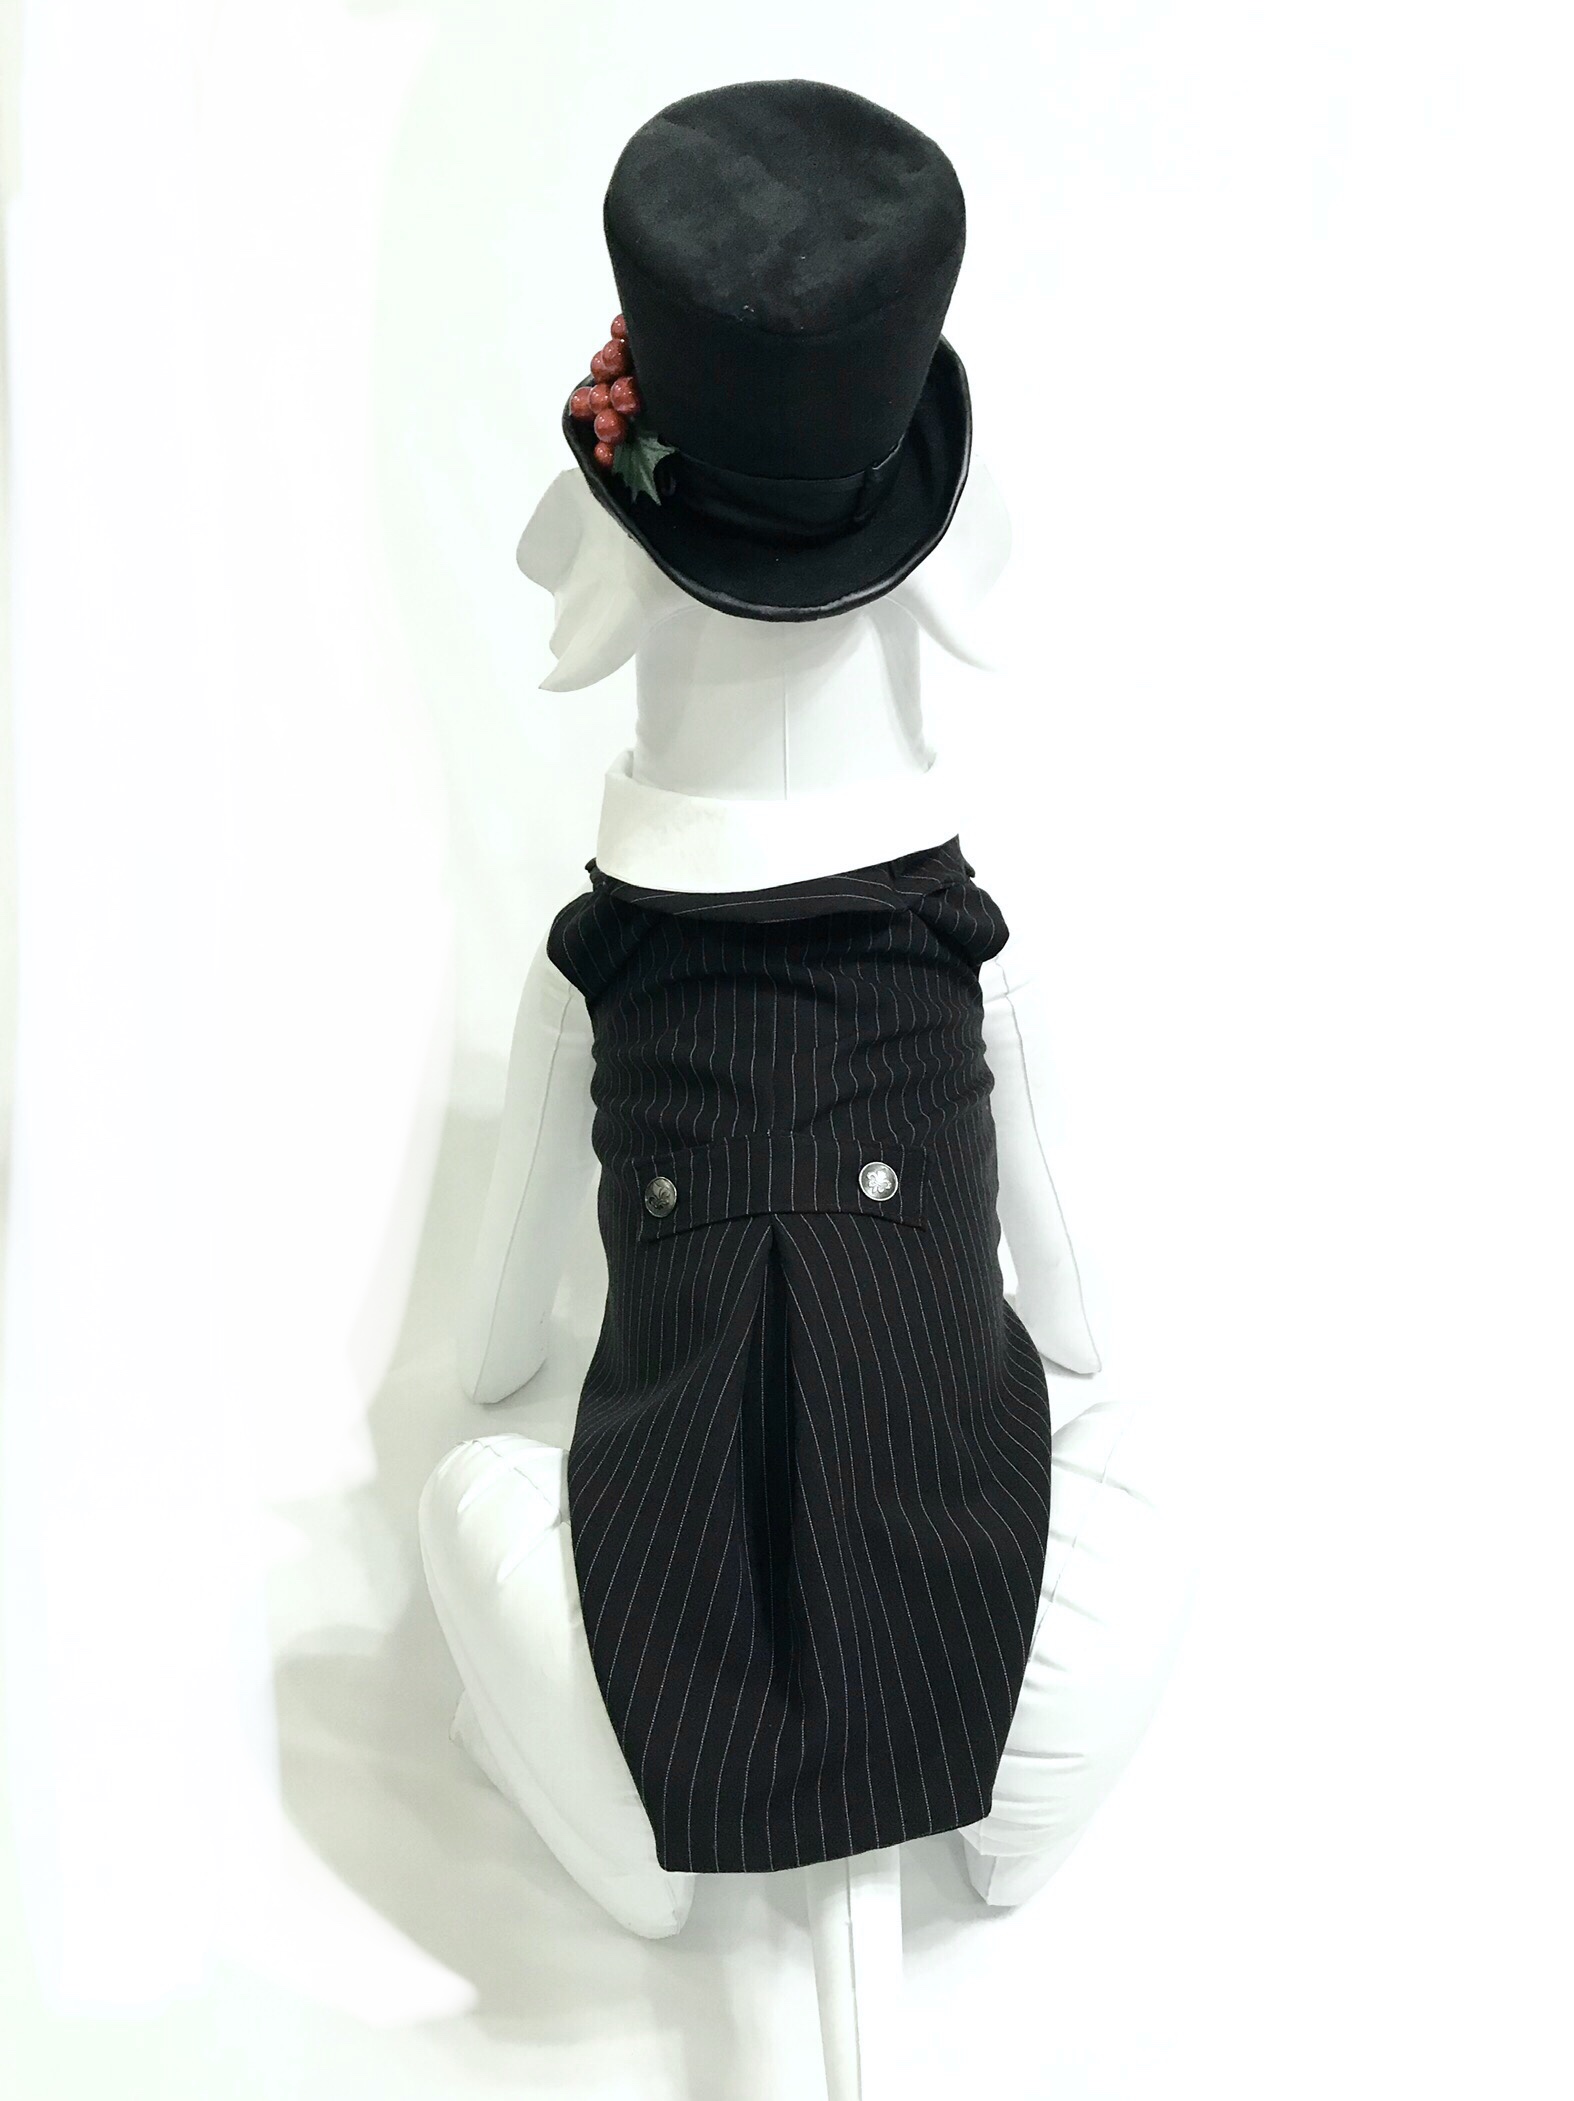 tailcoat tuxedo and top hat